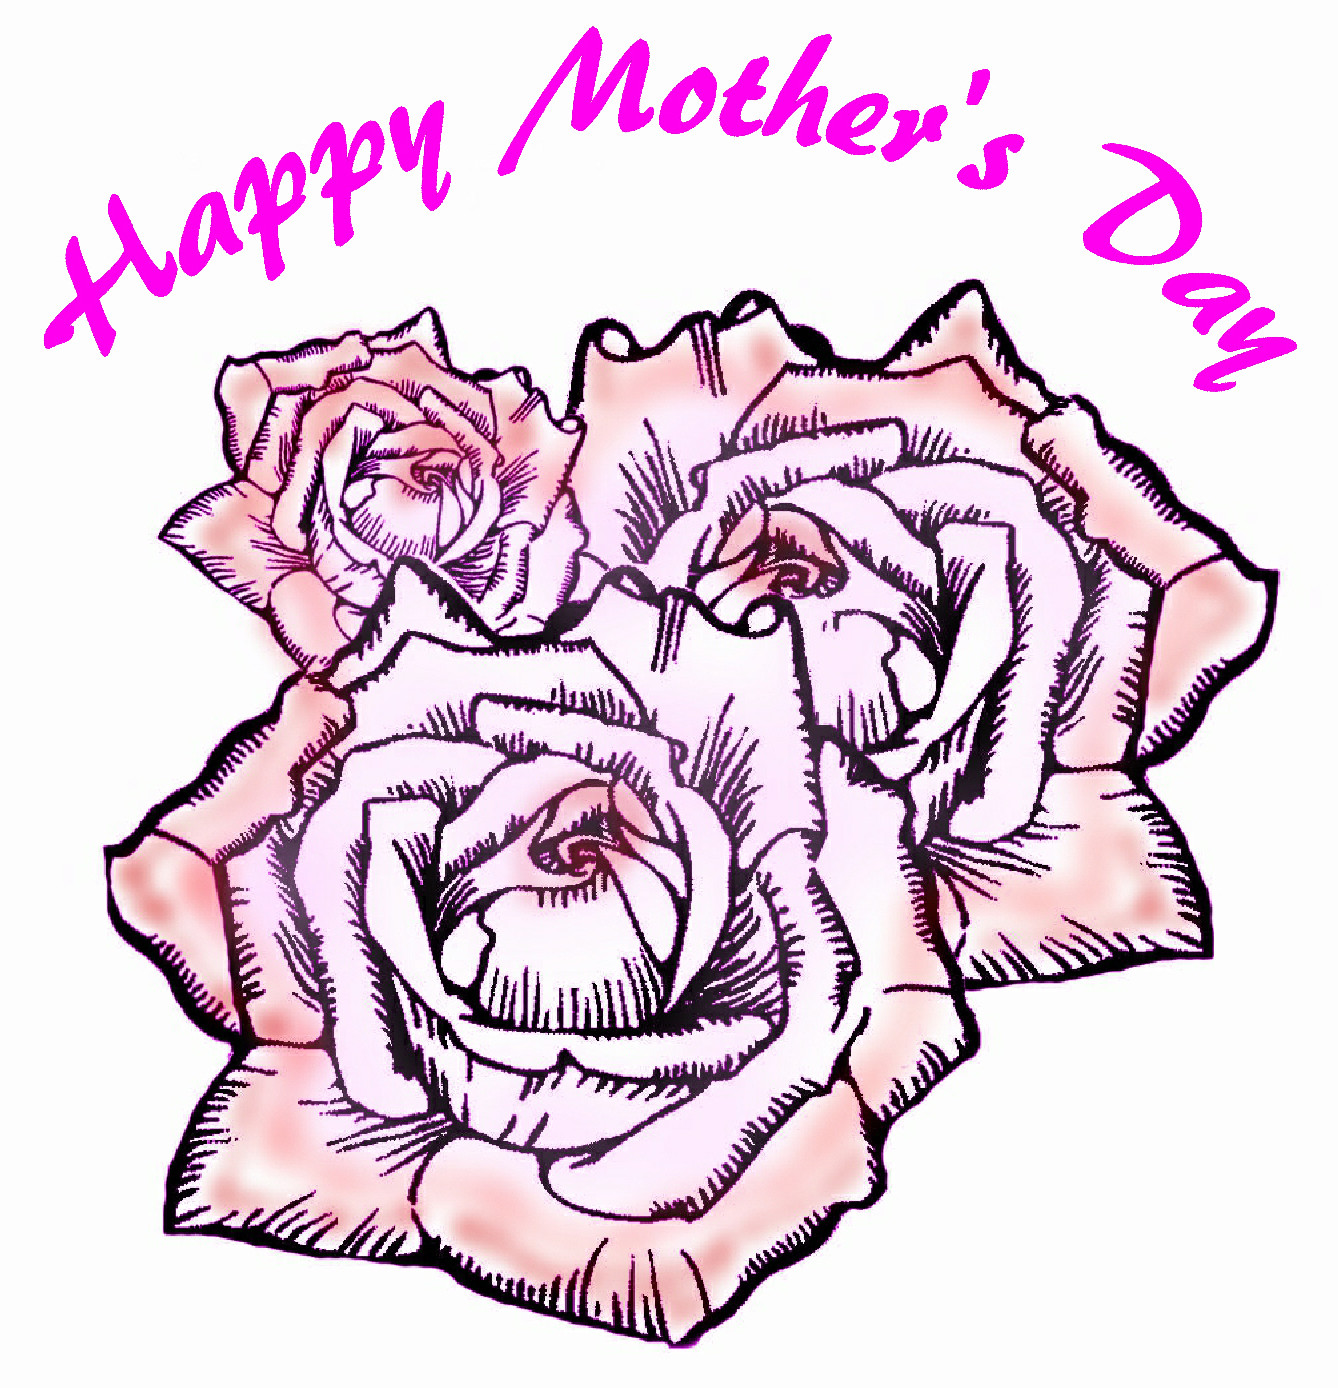 Public Domain Clip Art Photos and Images: Happy Mother's Day ...